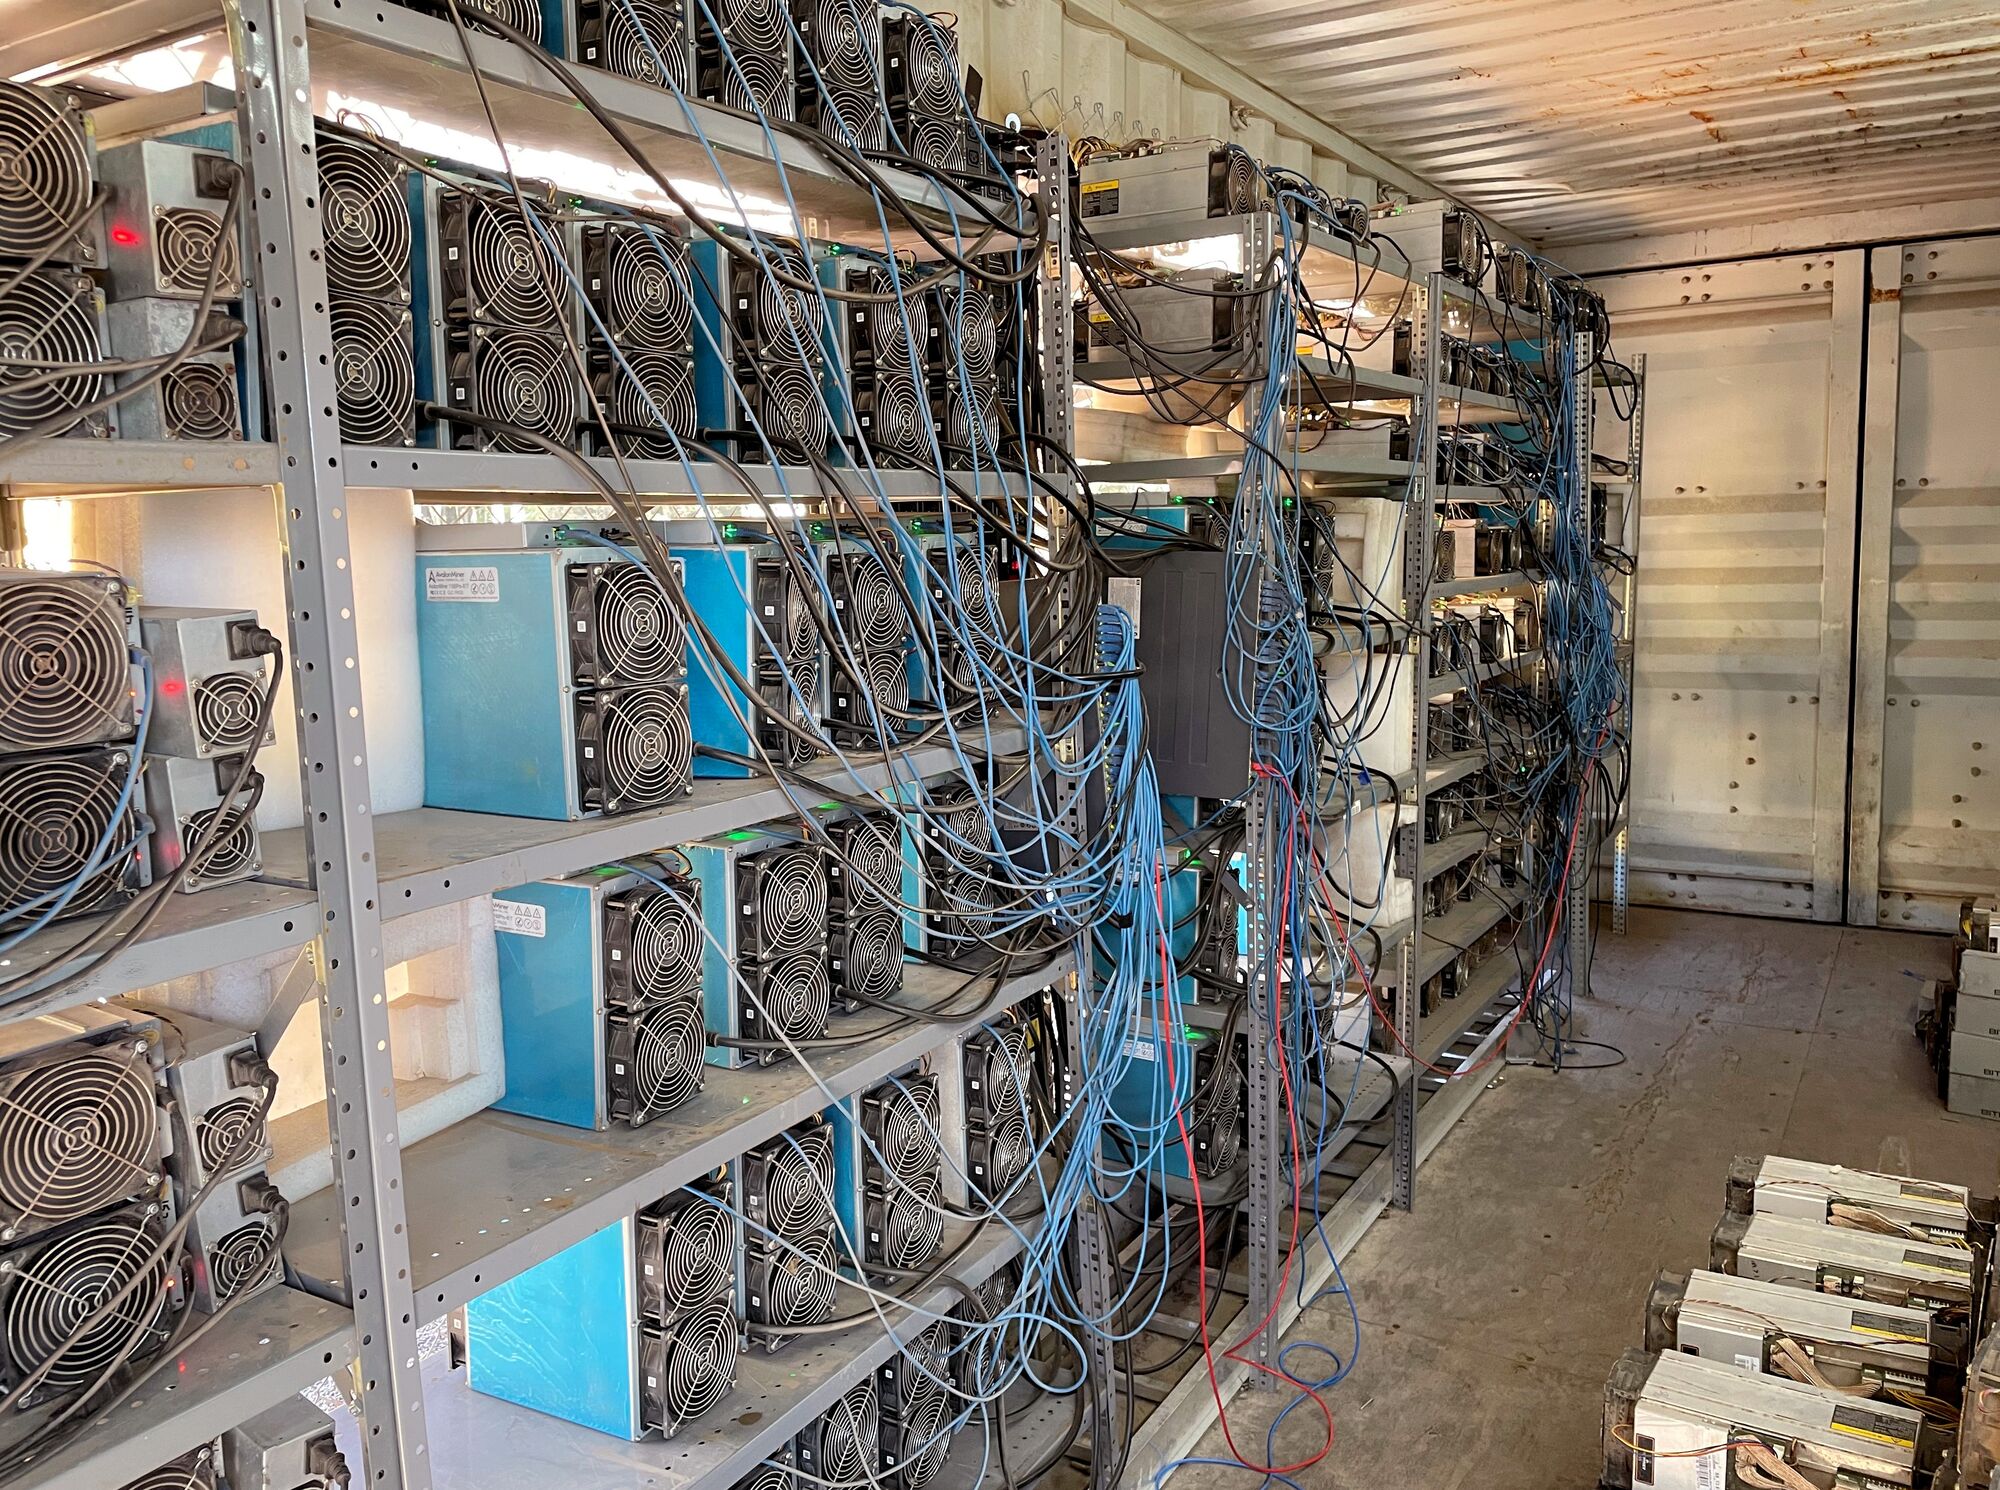 Equipment used to mine cryptocurrencies and powered by the Scrubgrass Generating Plant.